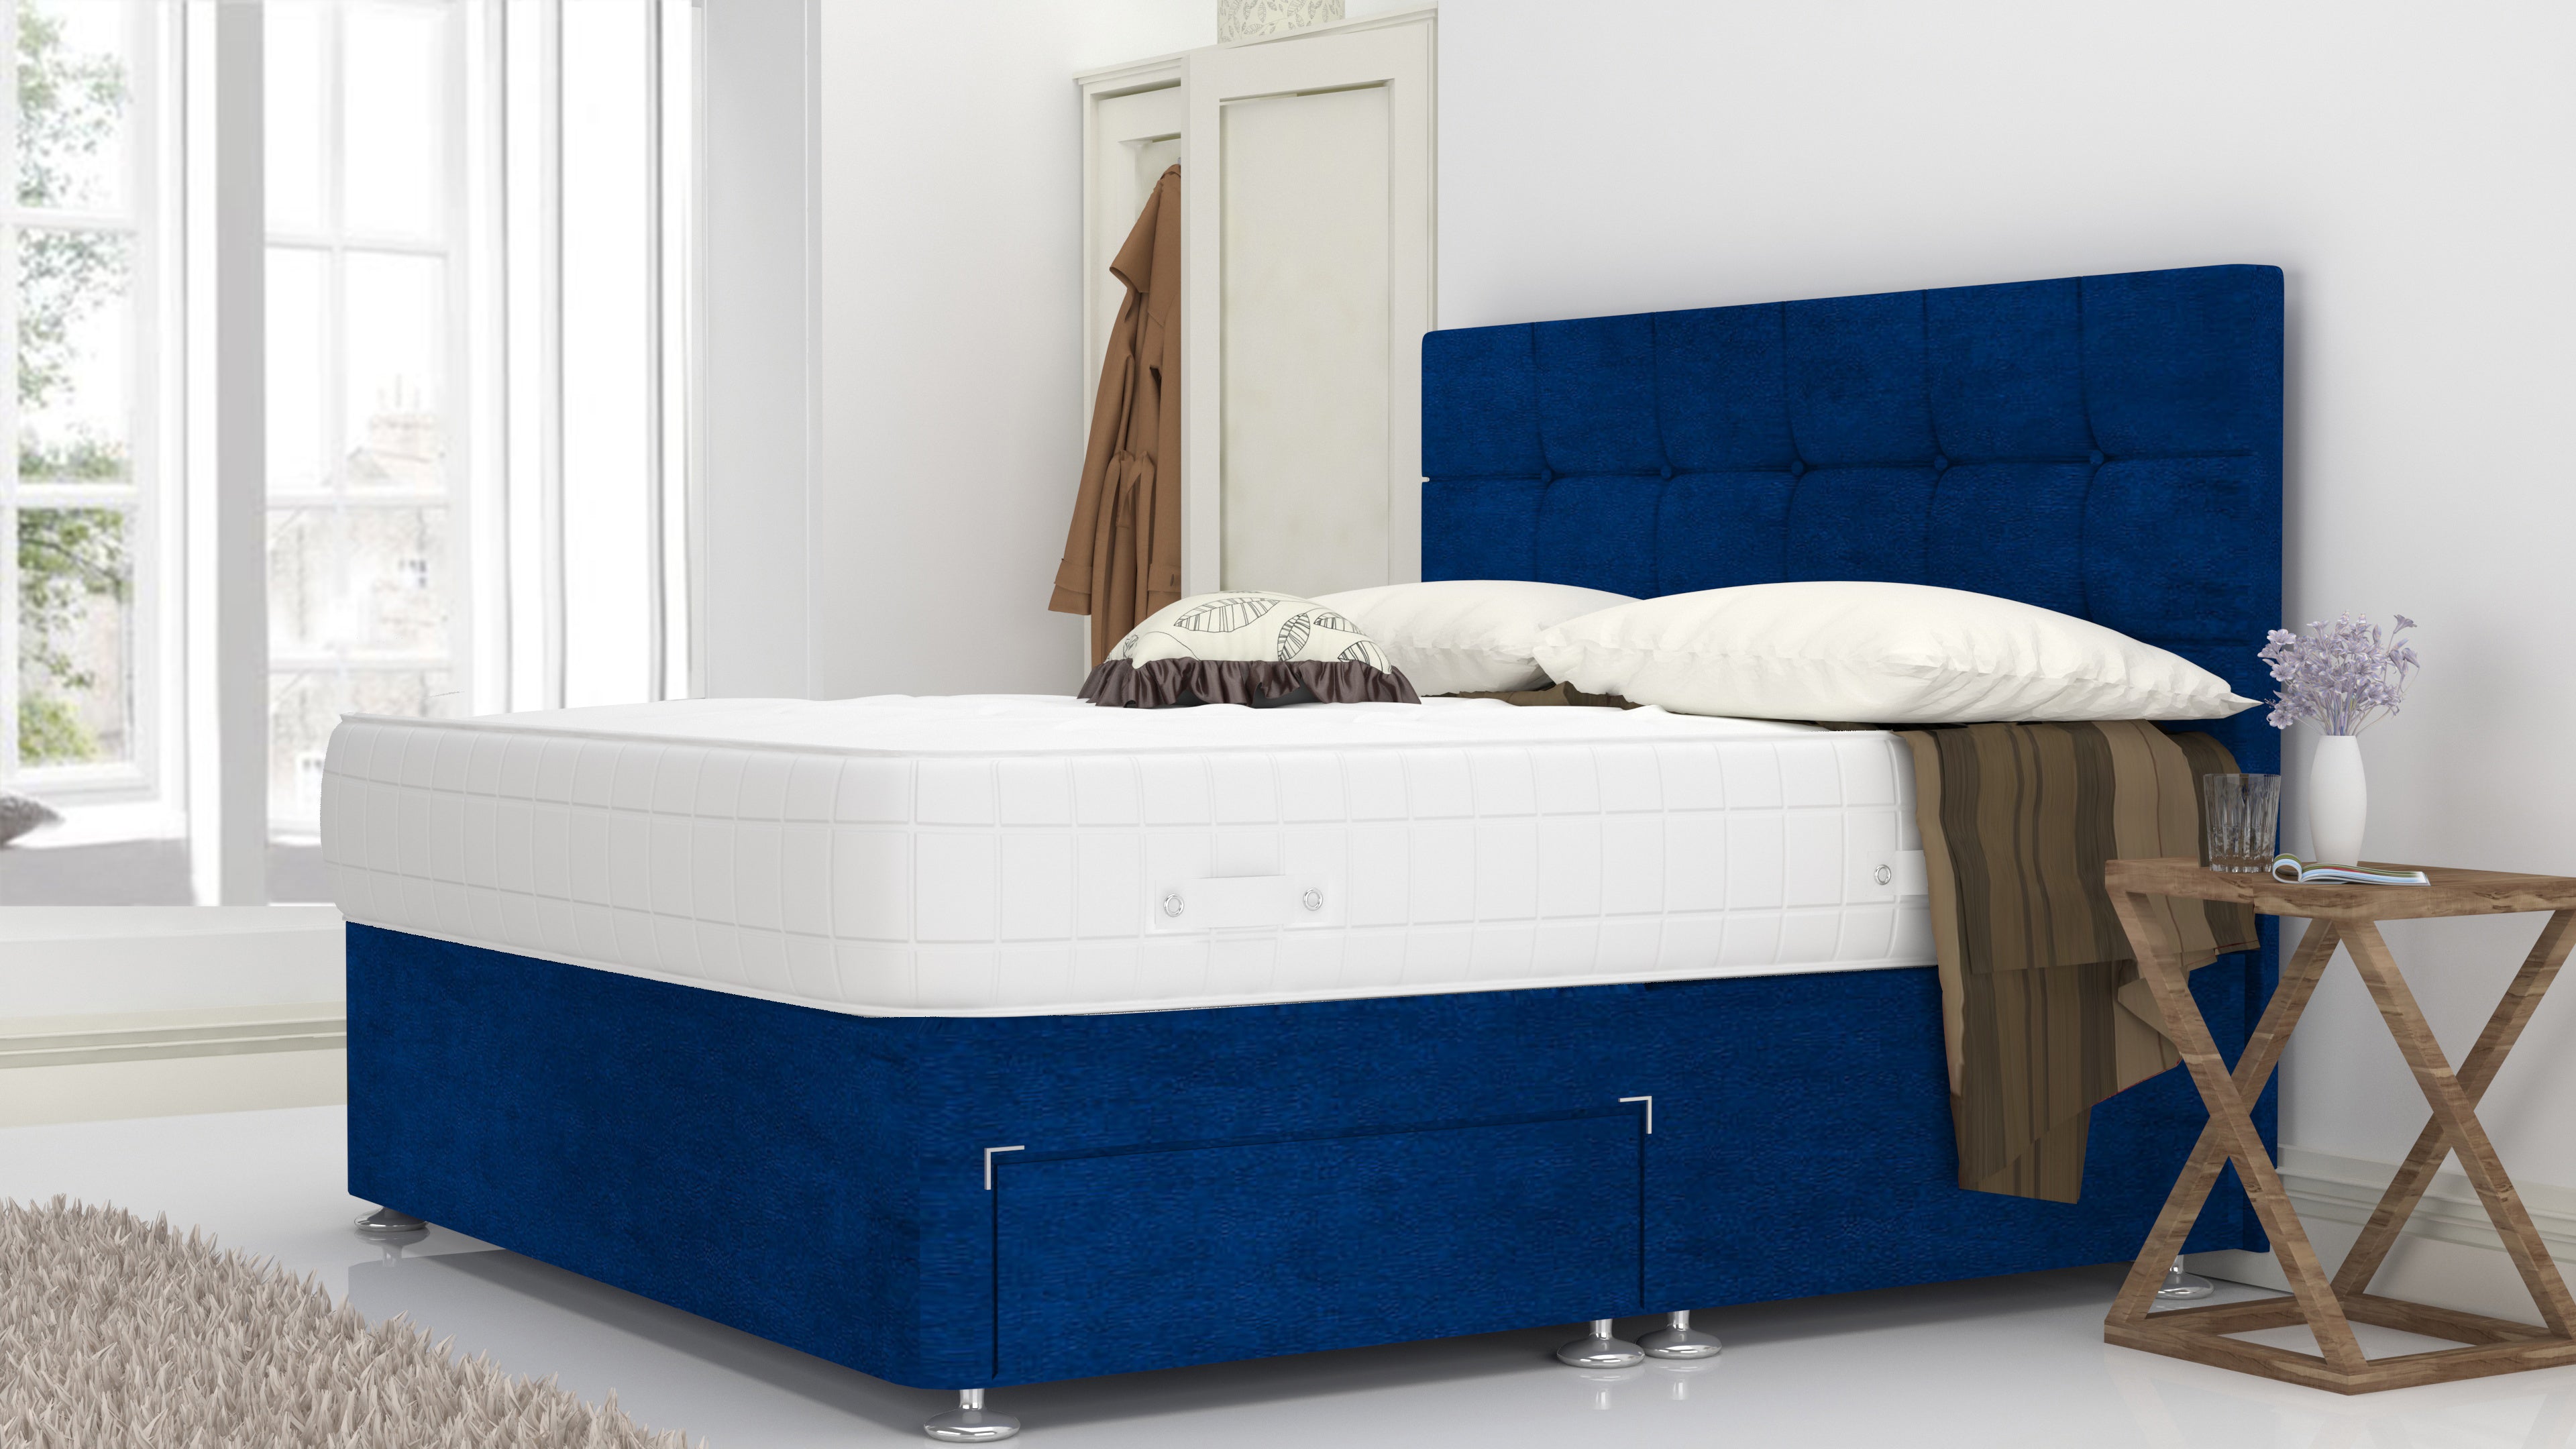 Blue Plush 6 Feet Divan Bed Set With Cube Headboard (Included Feet) And Free Orthopedic Mattress